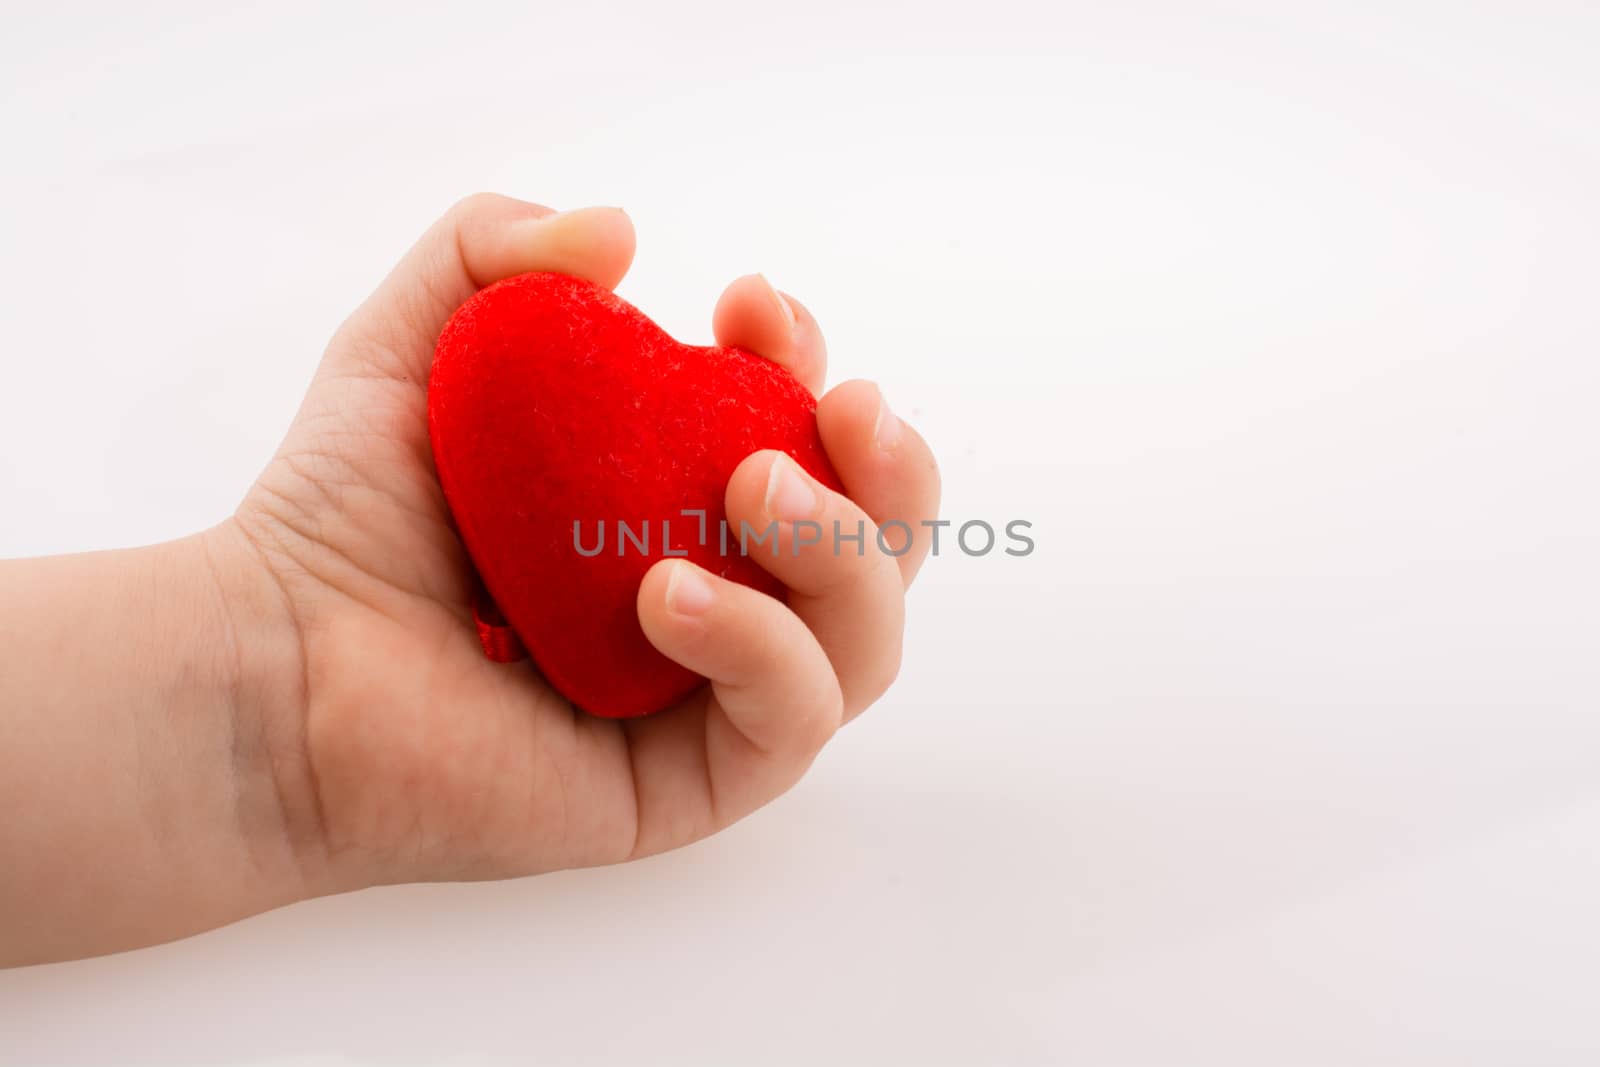 Little red color heart shape in hand on white background